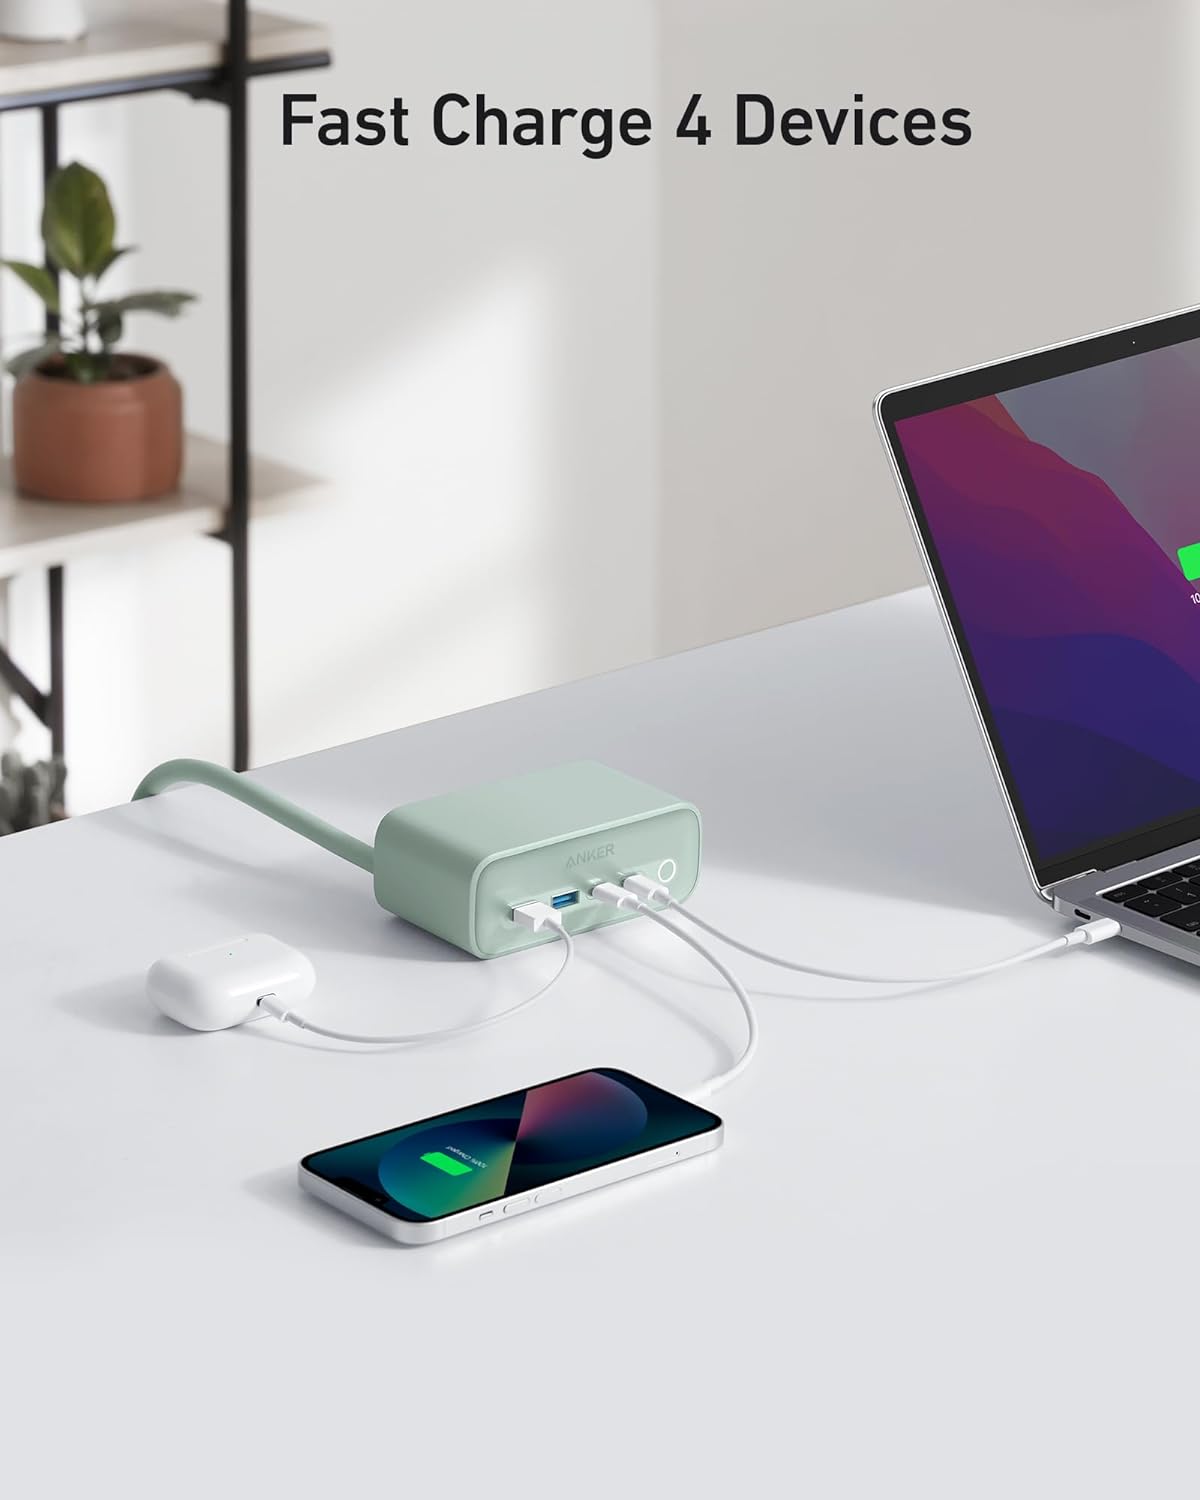 Anker 7-in-1 65W USB-C Power Strip and Charging Station for iPhone, MacBook - Home and Office